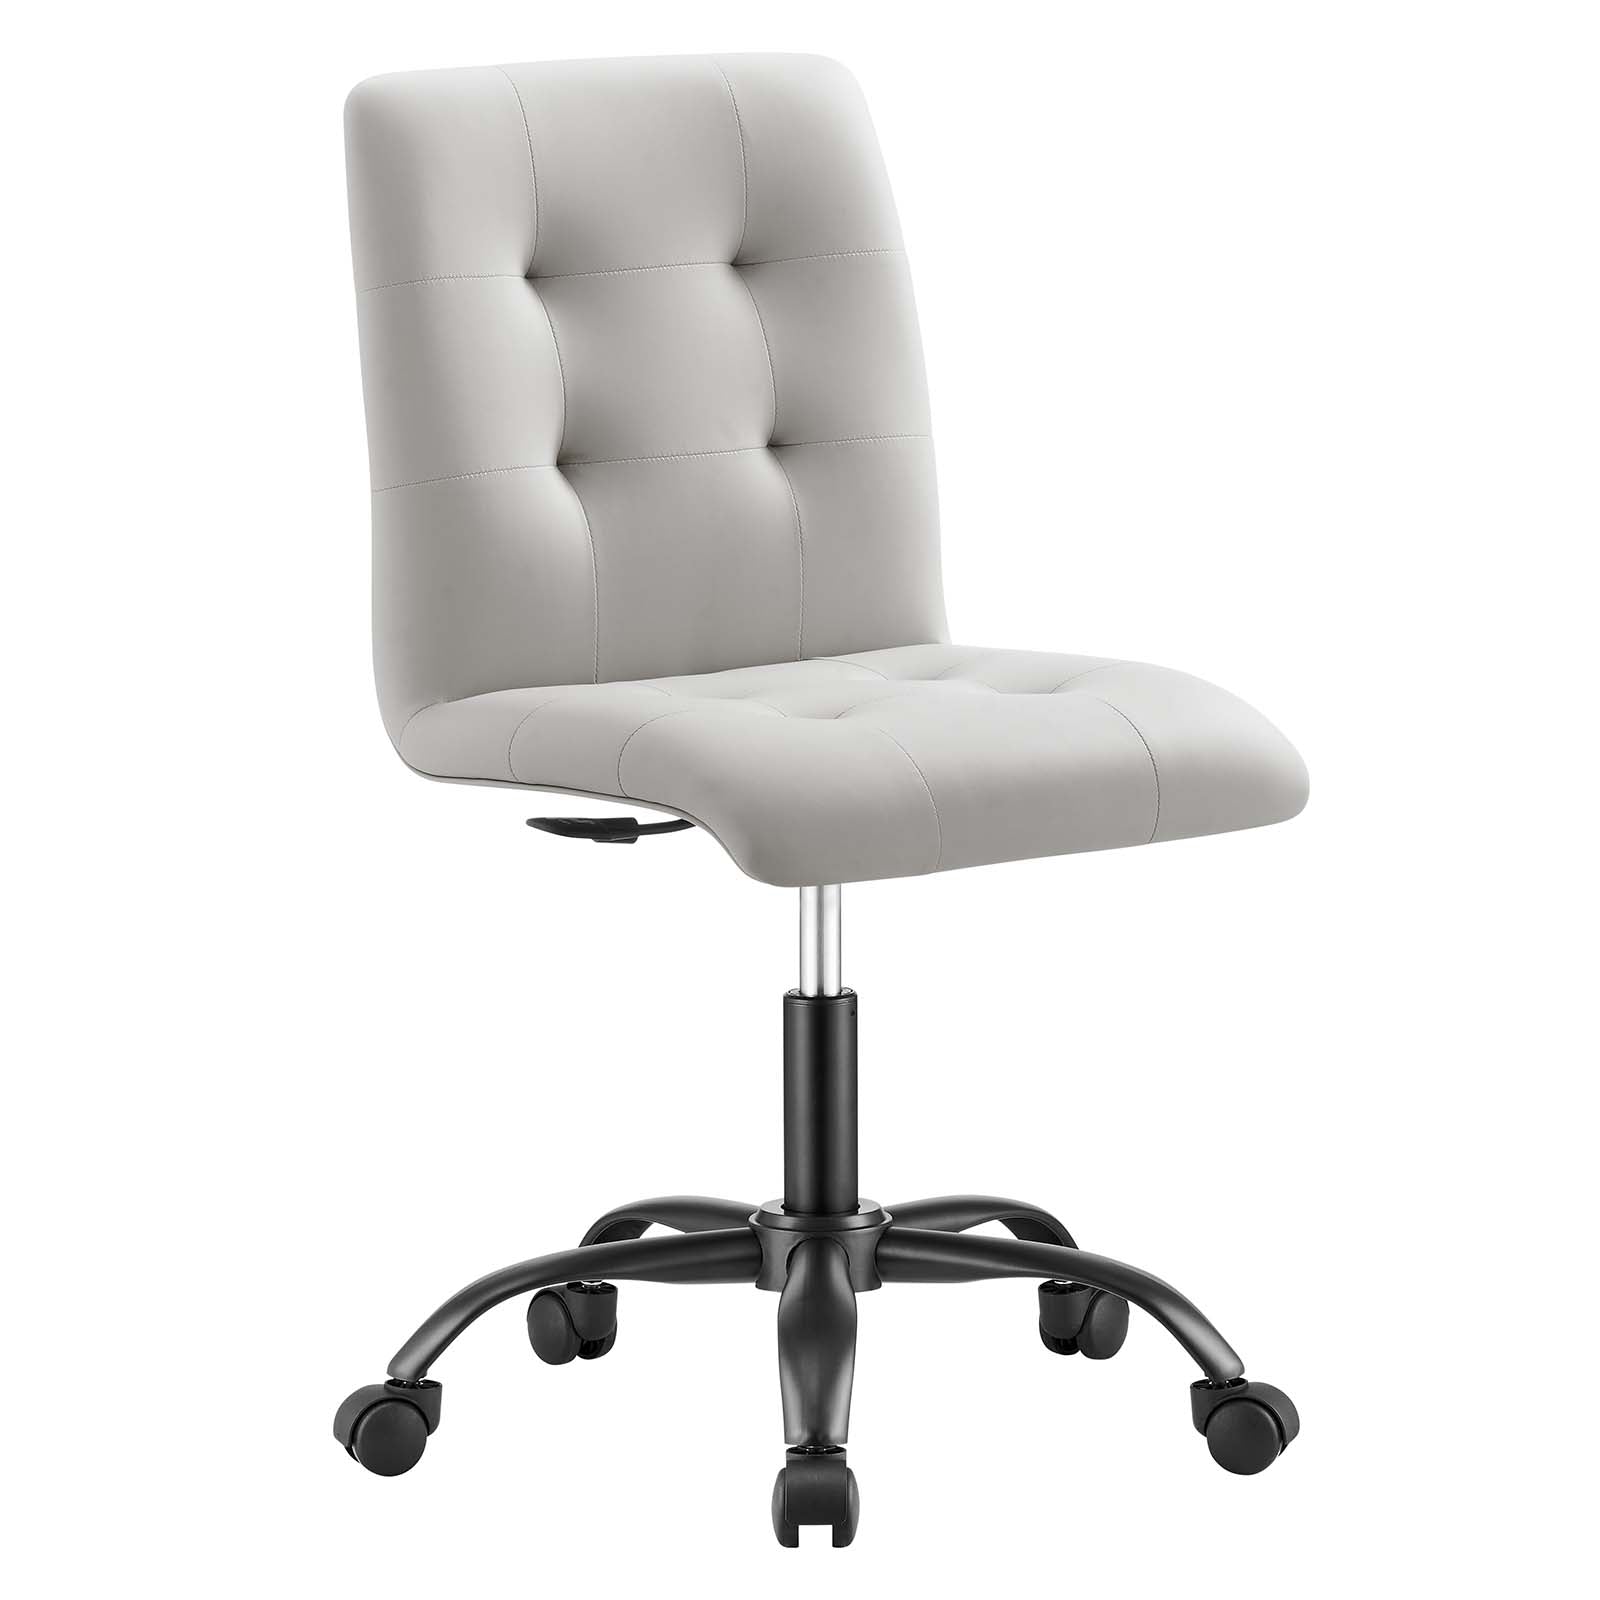 Modway Task Chairs - Prim-Armless-Vegan-Leather-Office-Chair-Black-Light-Gray